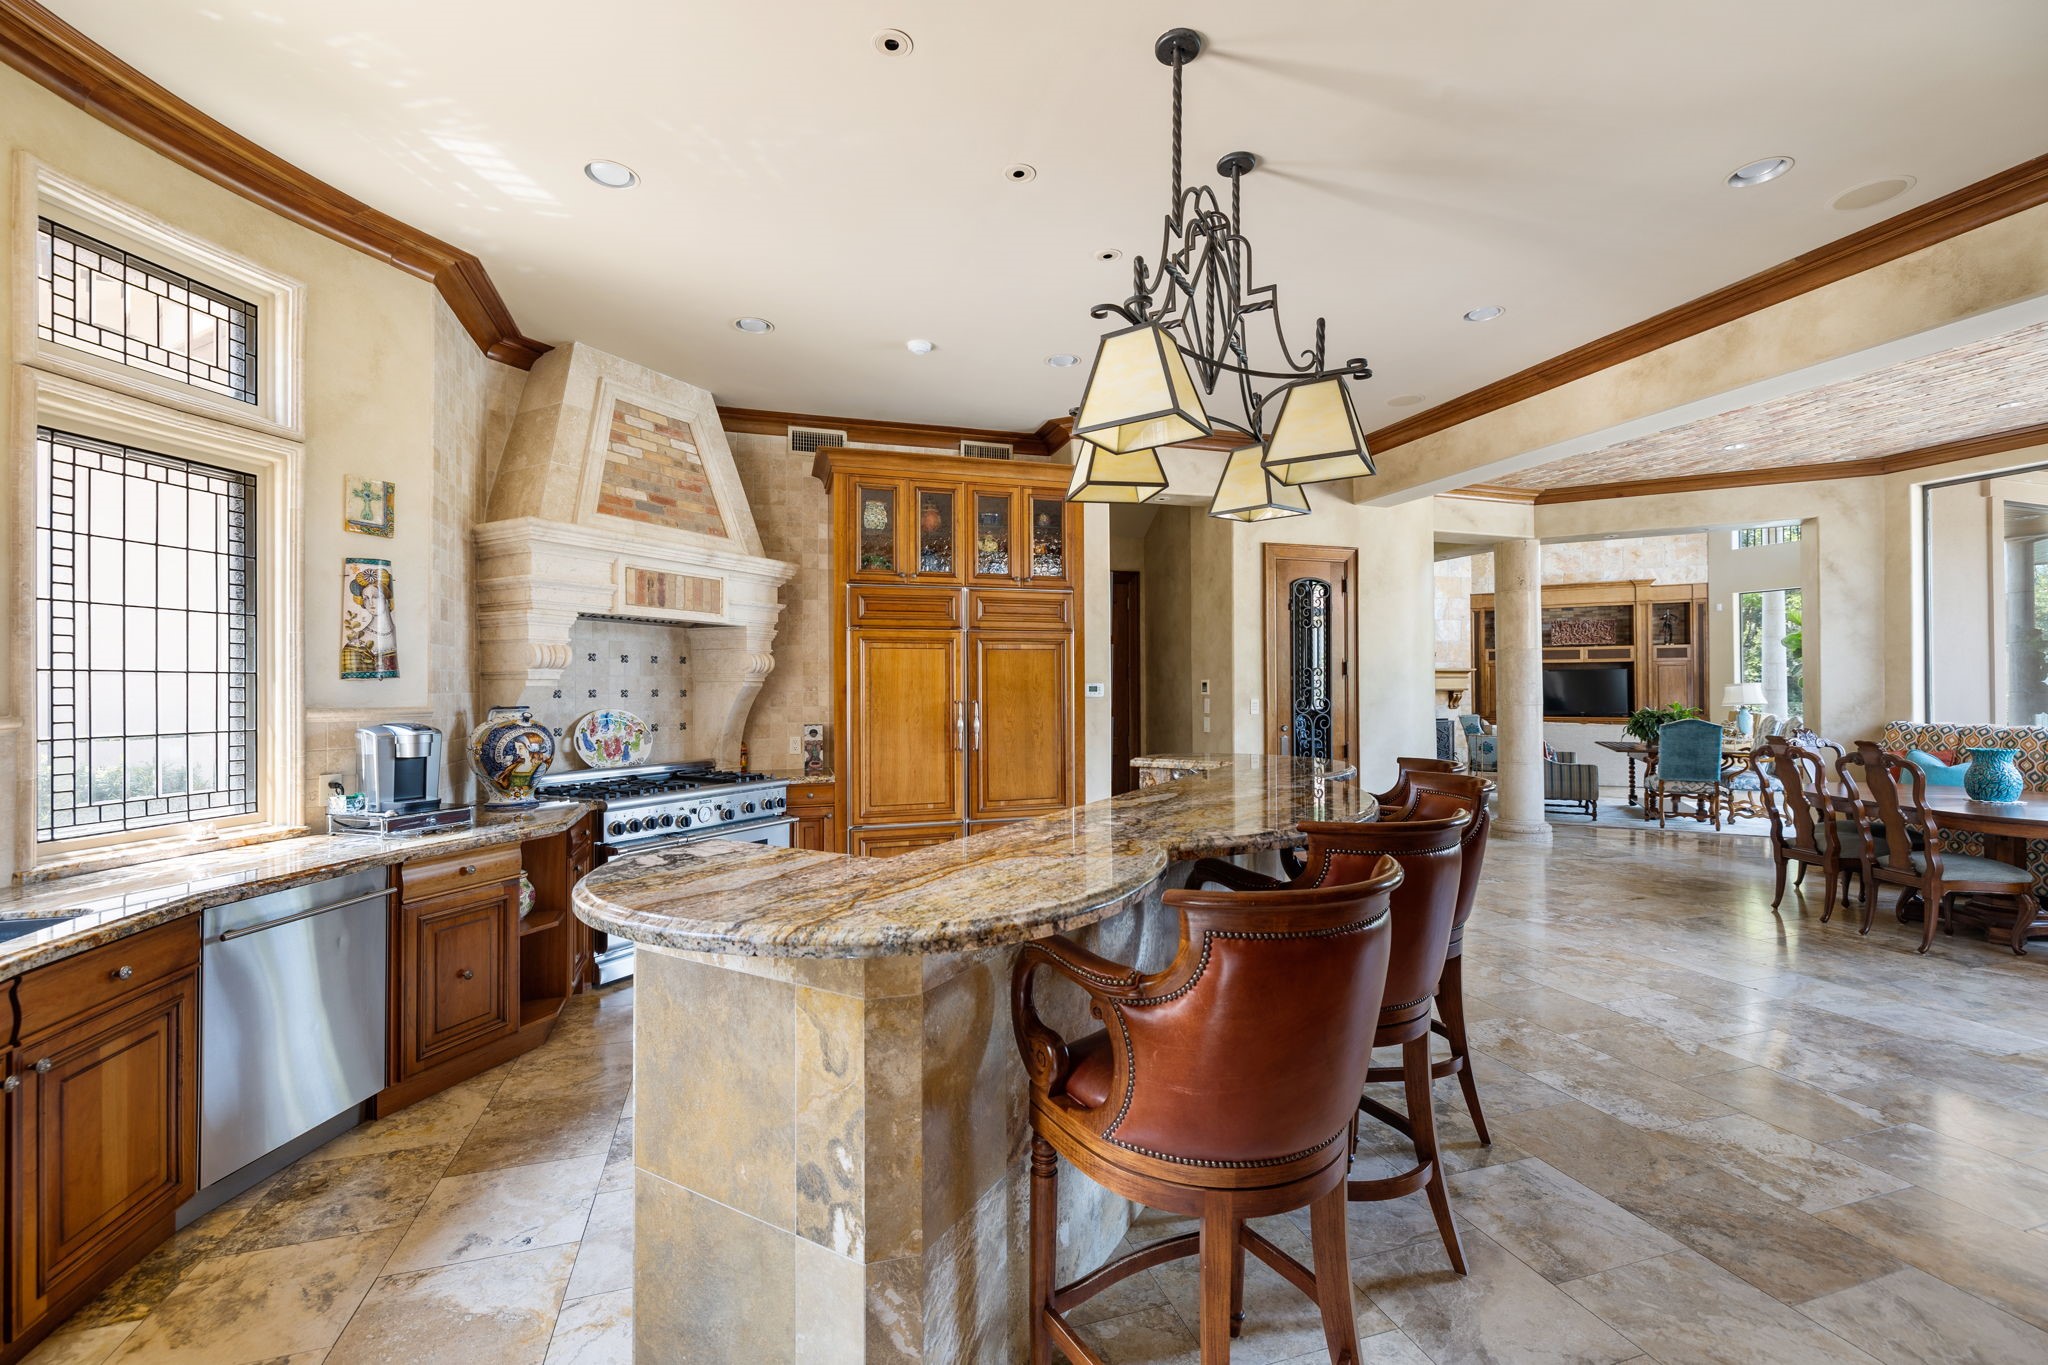 This Connoisseur's Kitchen as well includes: granite countertops, Scotsman ice machine and Subzero beverage refrigerator. The Island accommodates counter-height seating for four. Also included within is a 600-bottle climate controlled walk-in wine room with custom iron door.